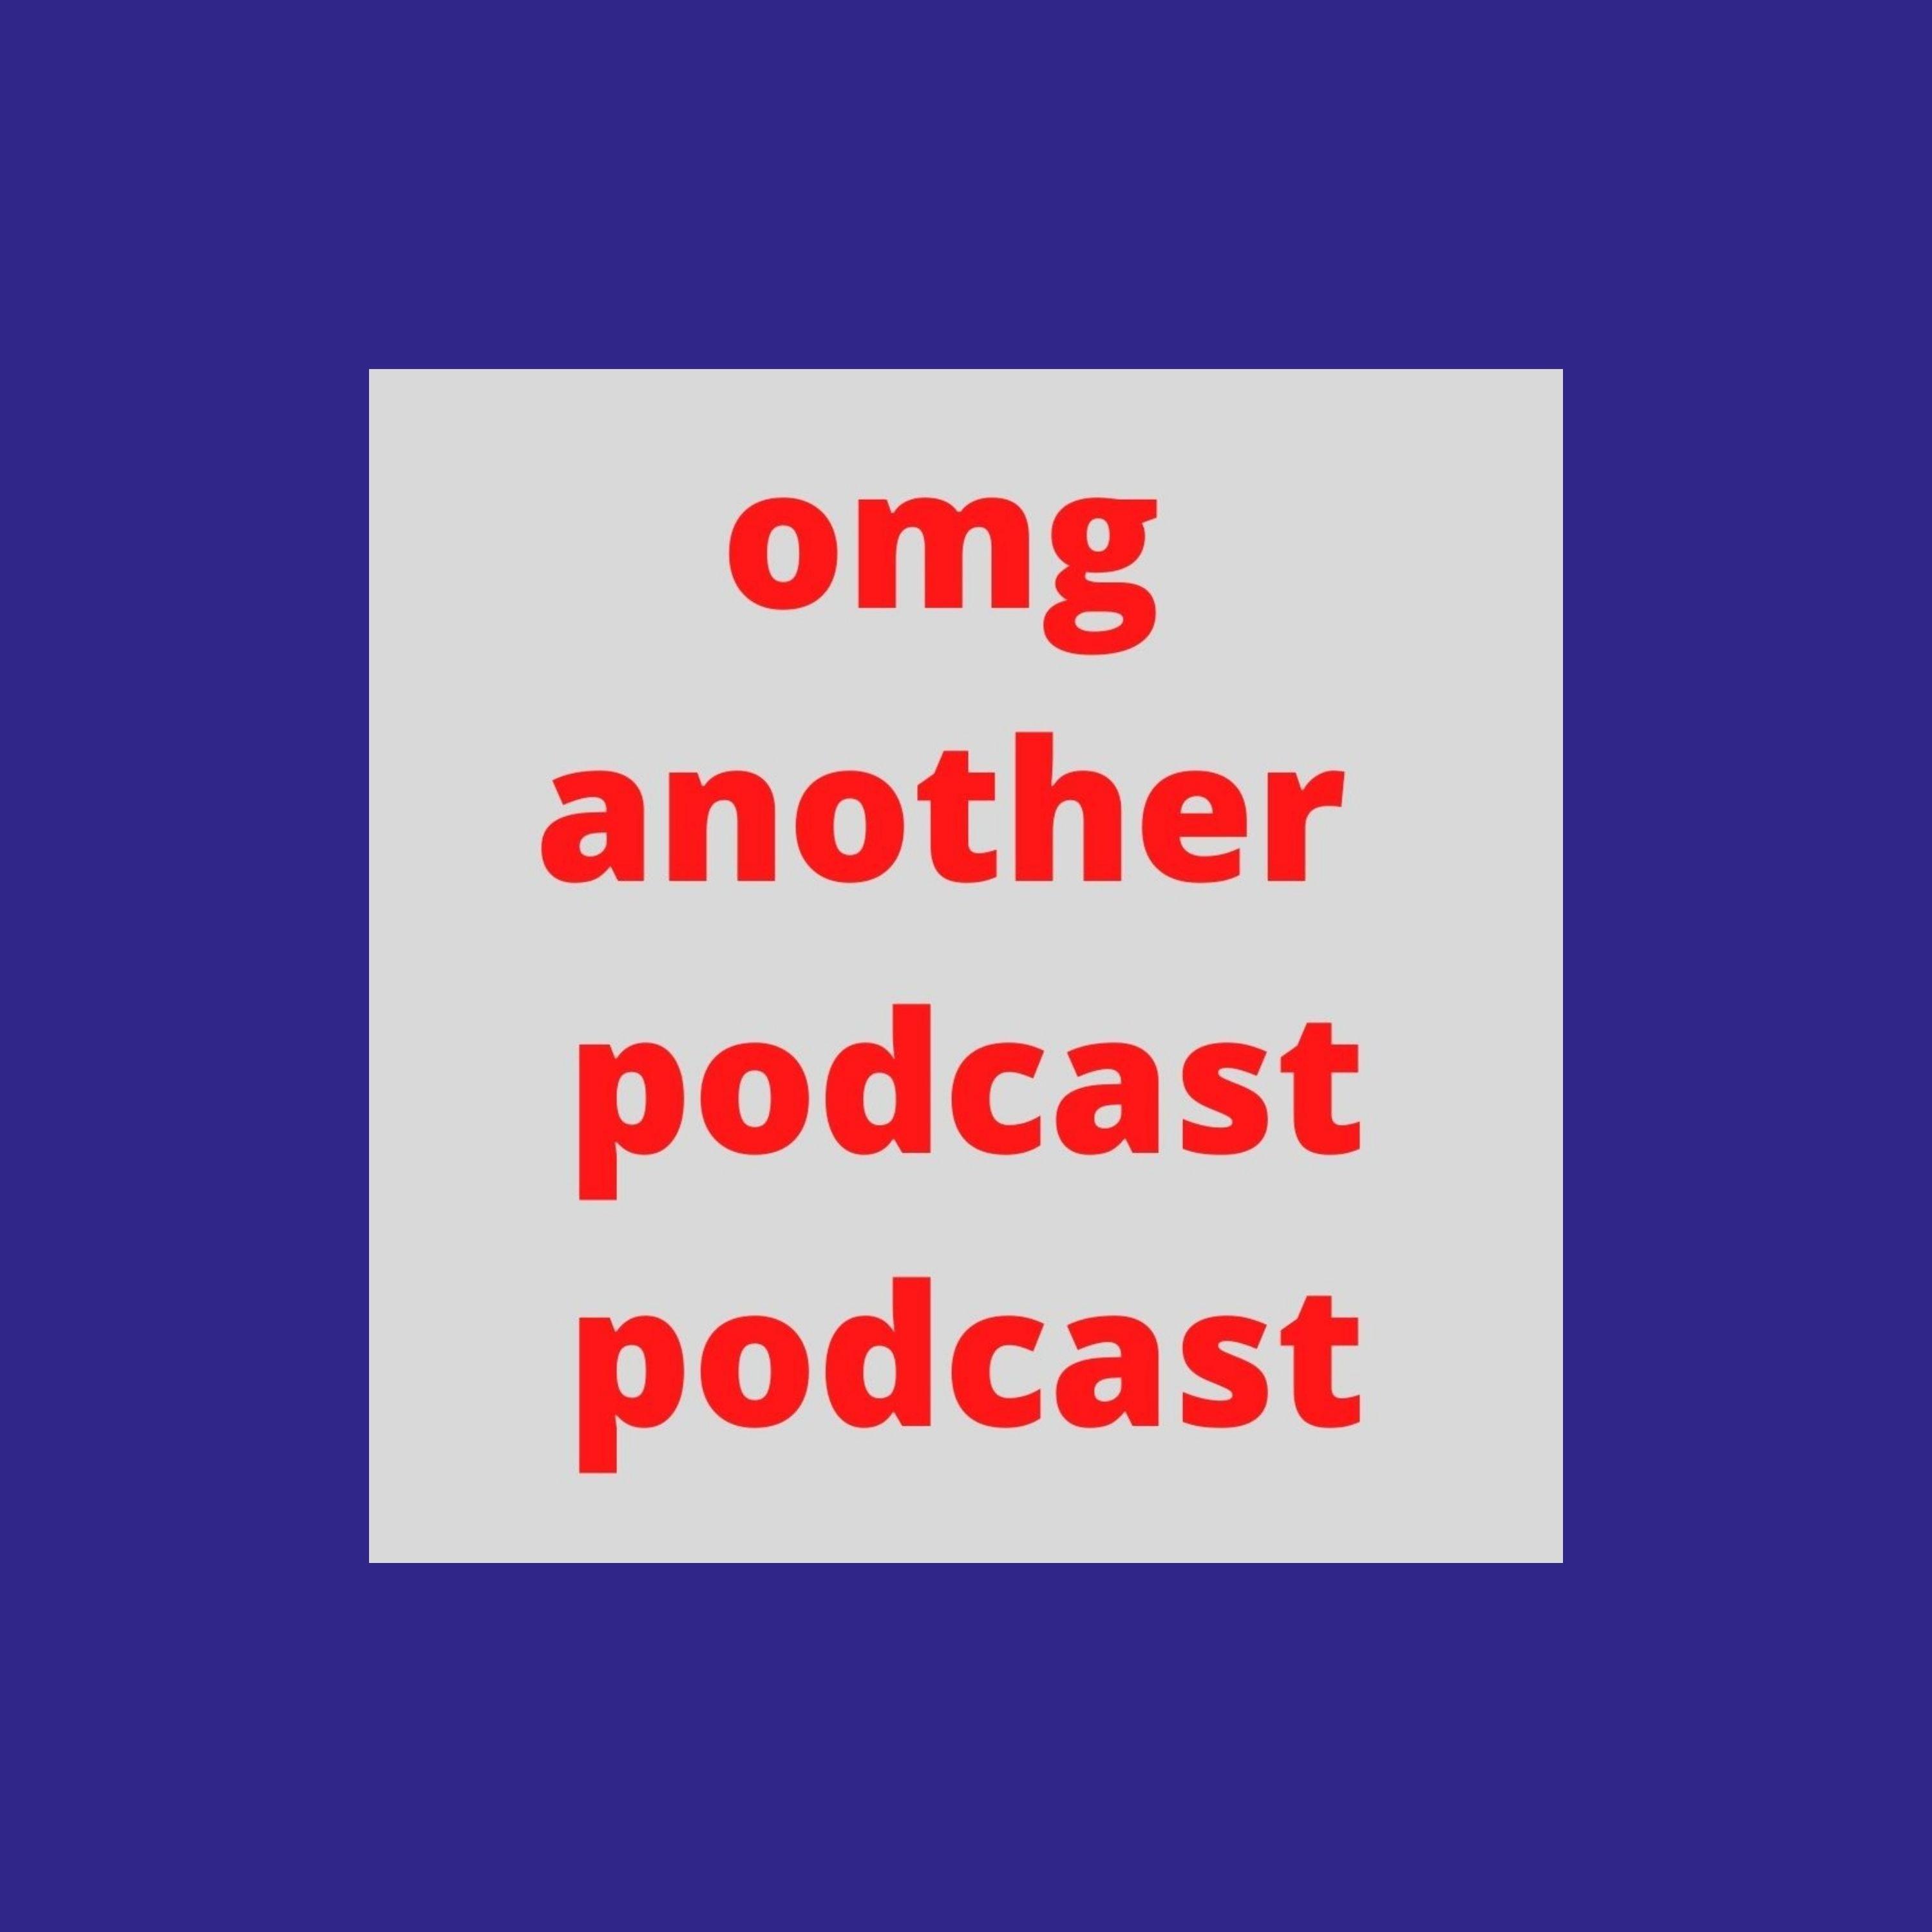 omg another podcast podcast